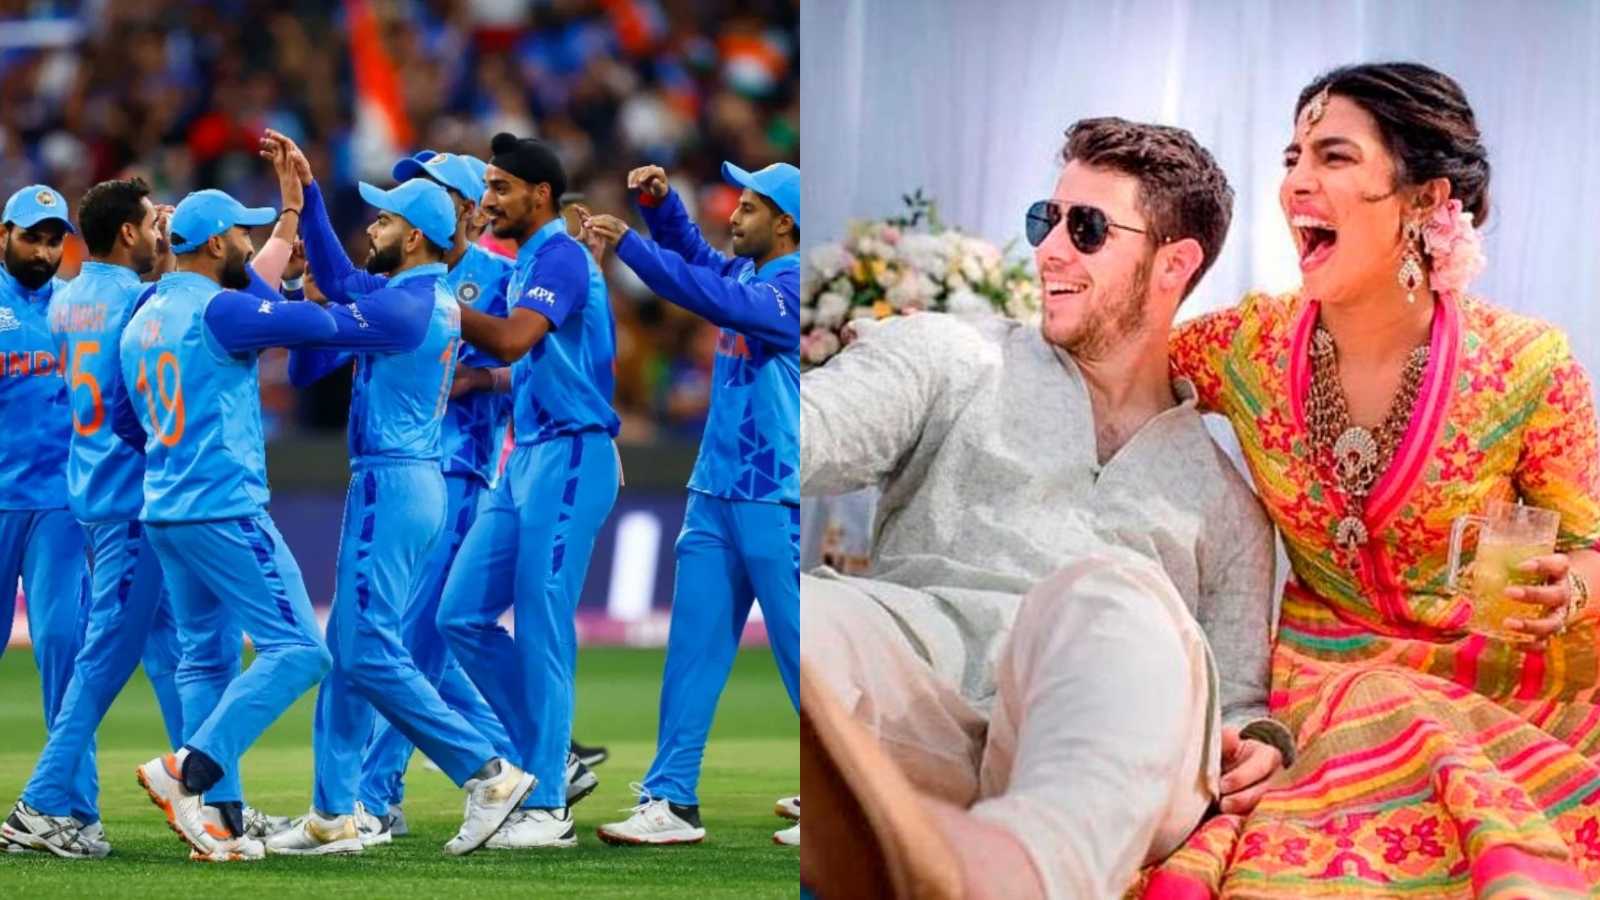 'National jiju' Nick Jonas celebrates Team India's victory against Pakistan in T20 World Cup match; delighted desis react